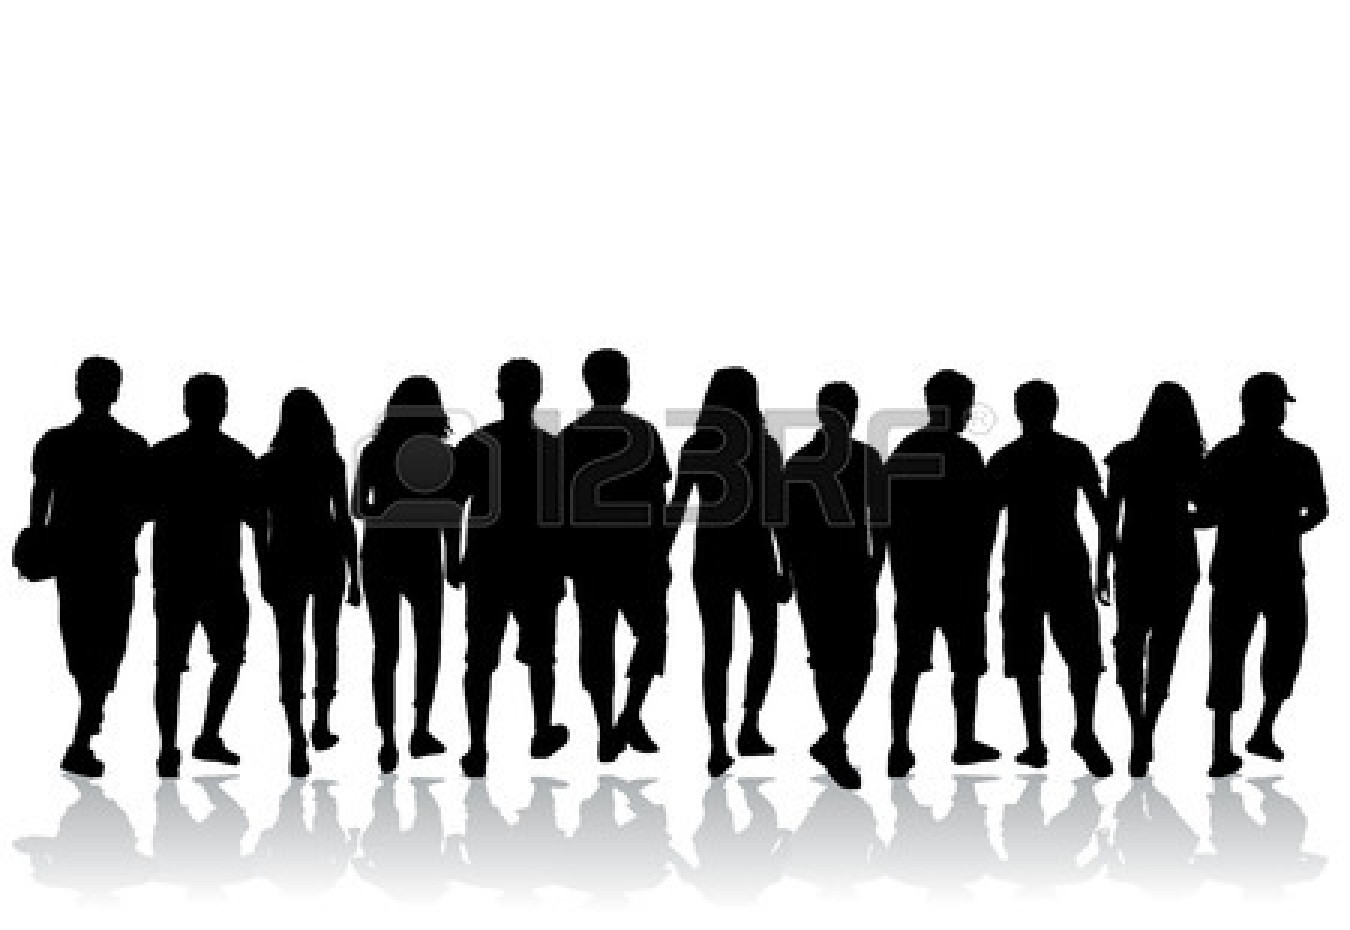 15 Crowded People Sitting Vector Images